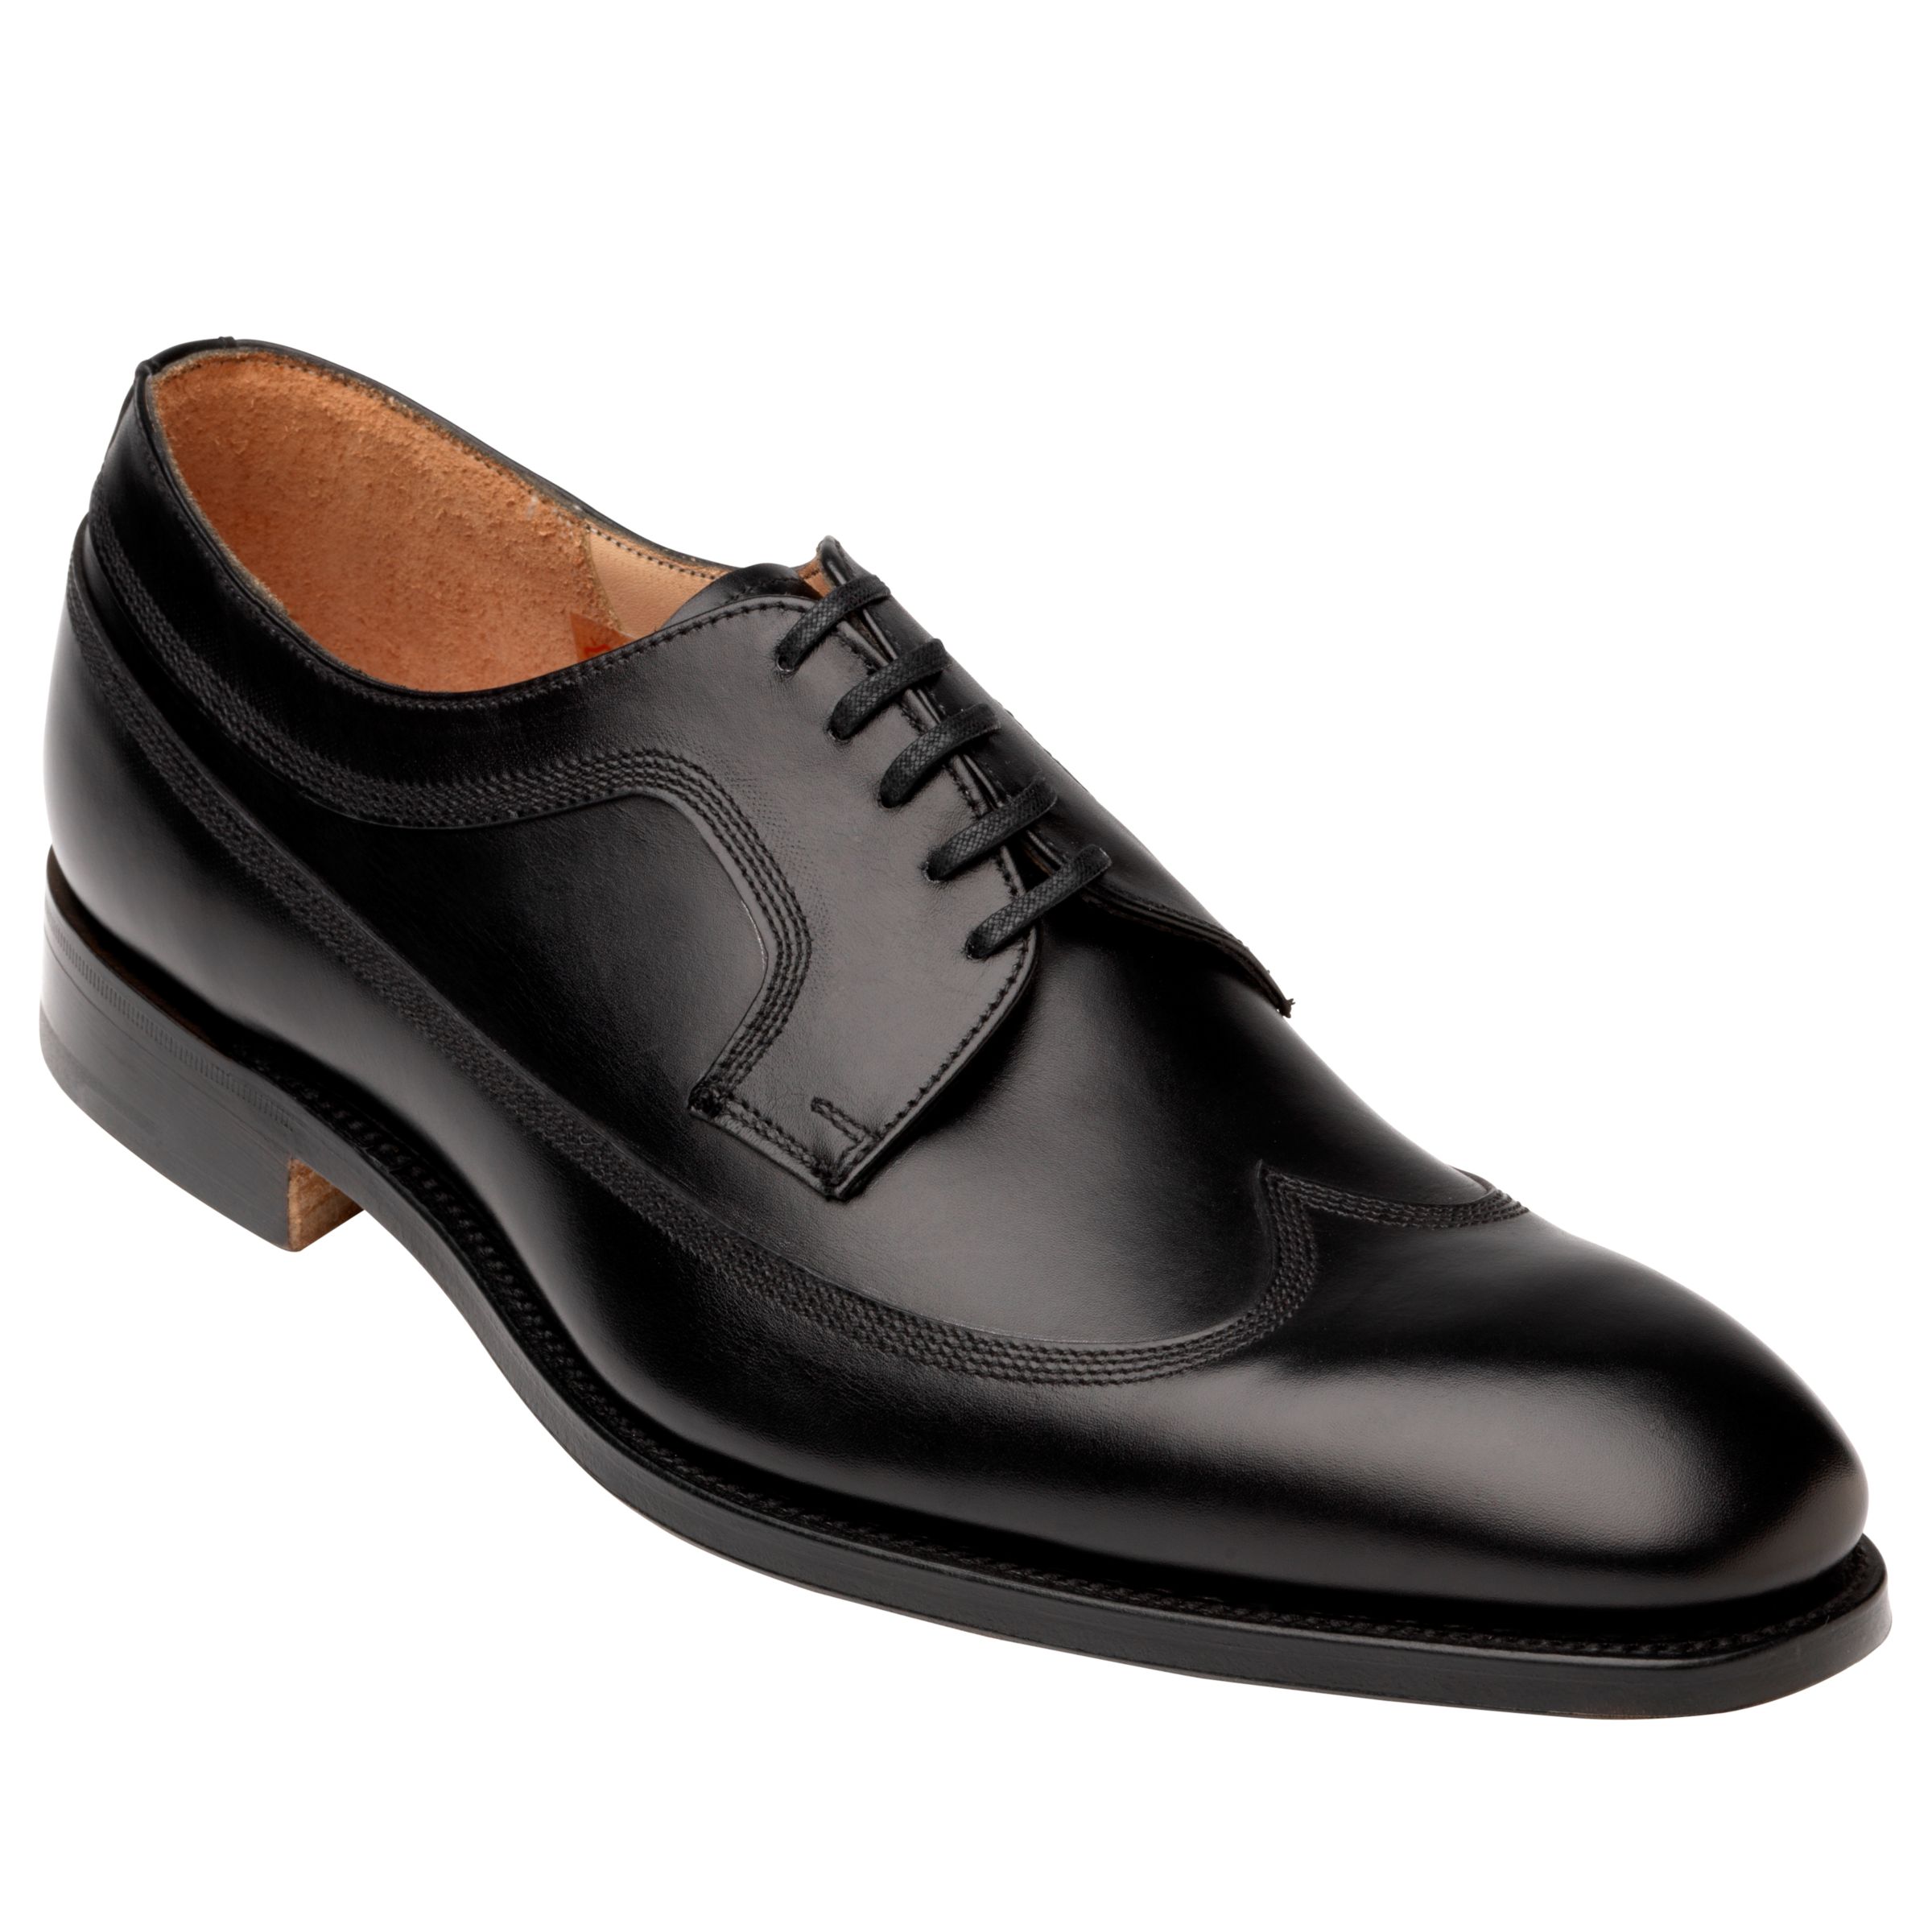 Grenson Phillip Leather Lace Up Shoes, Black at John Lewis